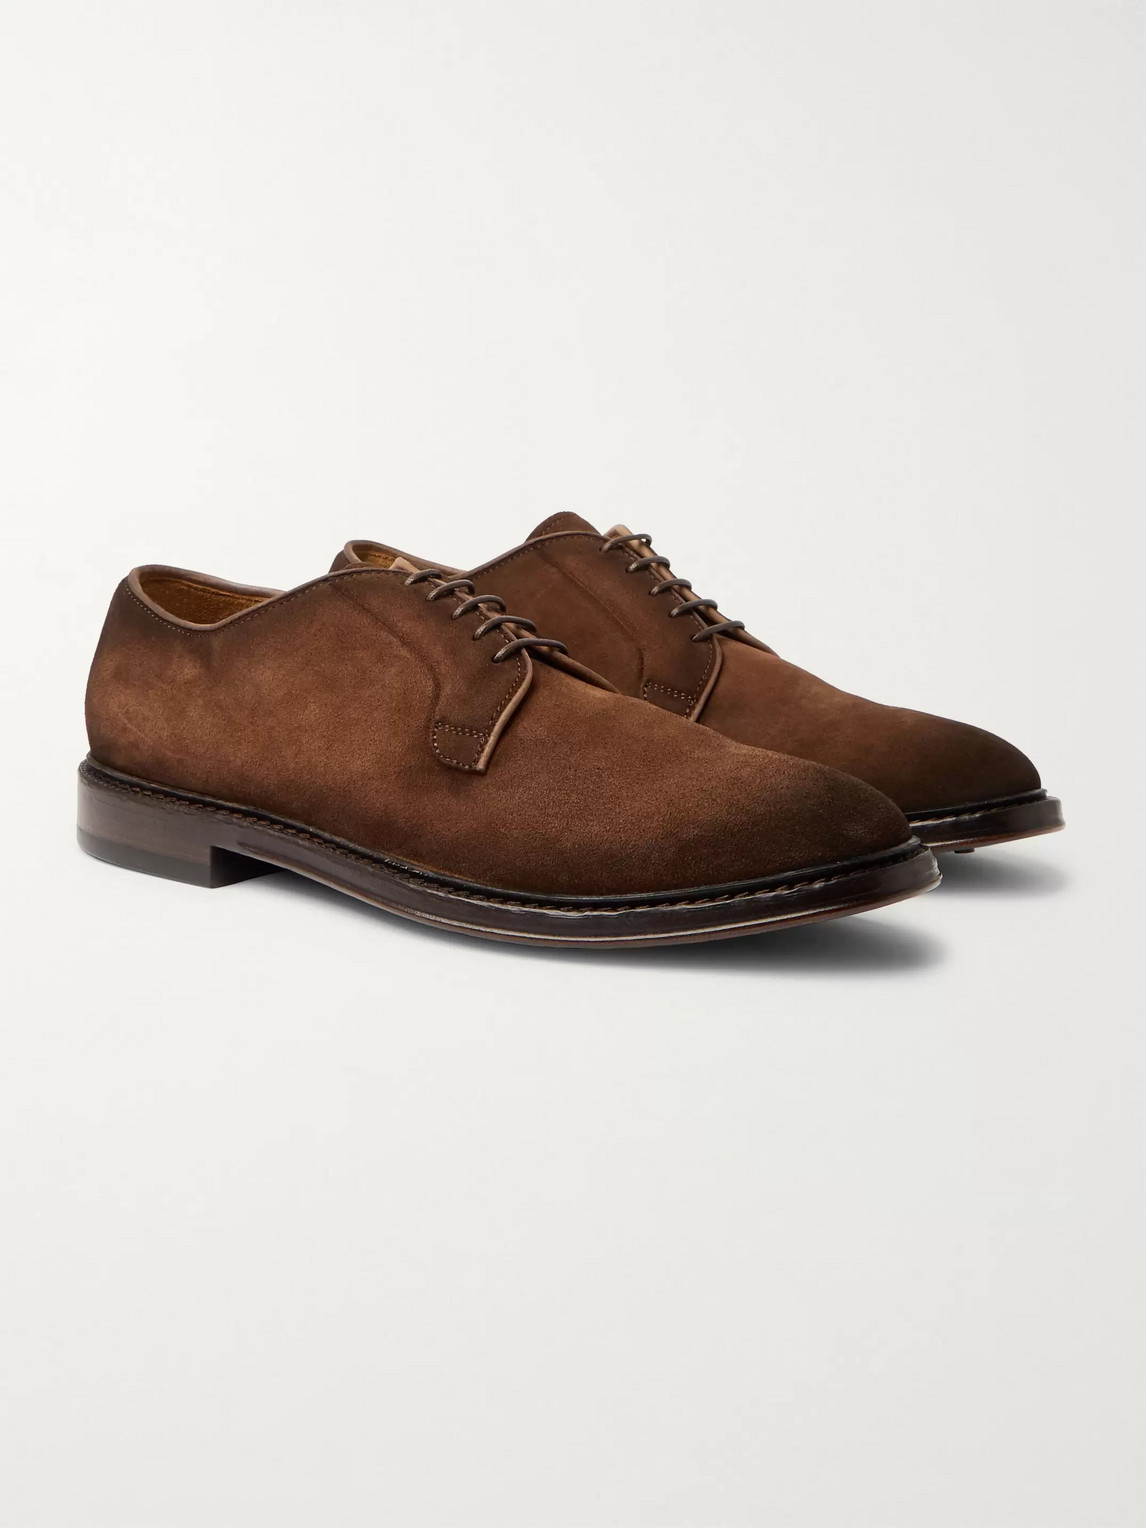 OFFICINE CREATIVE HOPKINS LEATHER DERBY SHOES